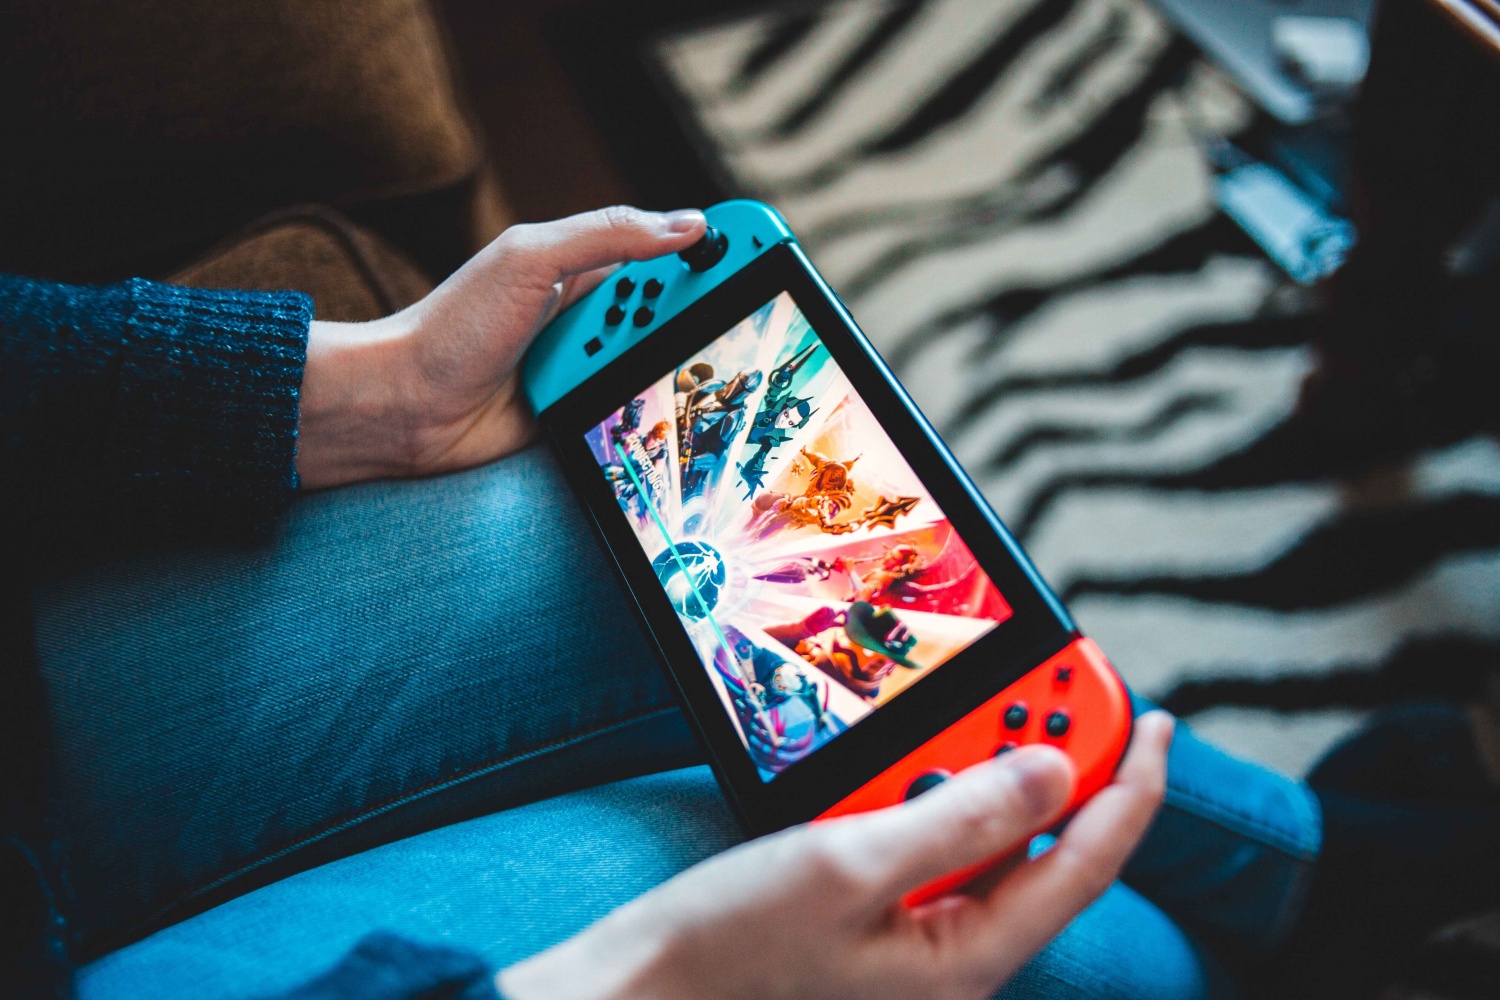 Nintendo Switch Update Blocks More Bad Words in Chats—Making the Console More SFW?